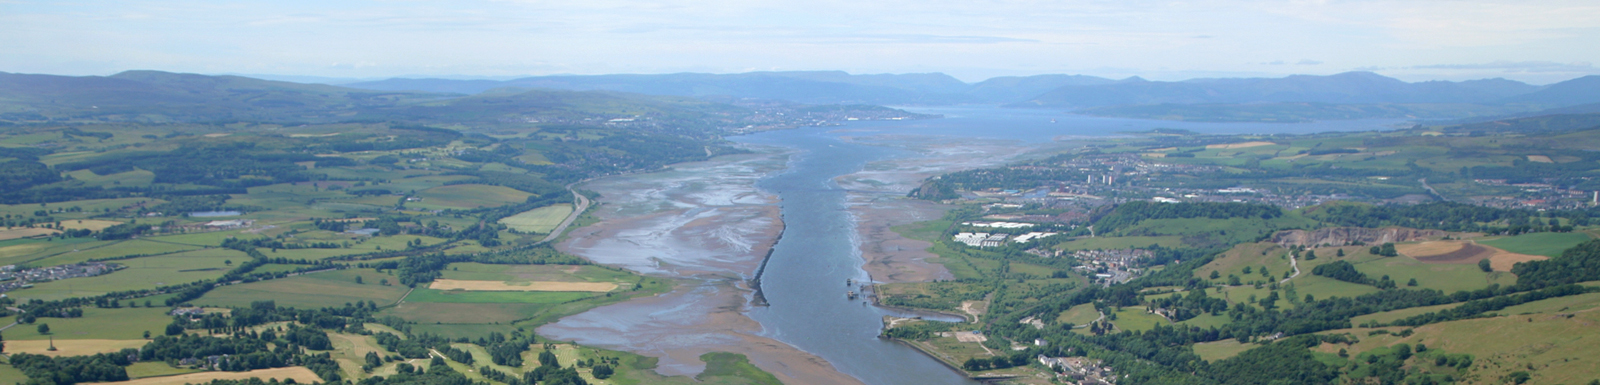 The River Clyde meets the Firth of Clyde at Dumbarton